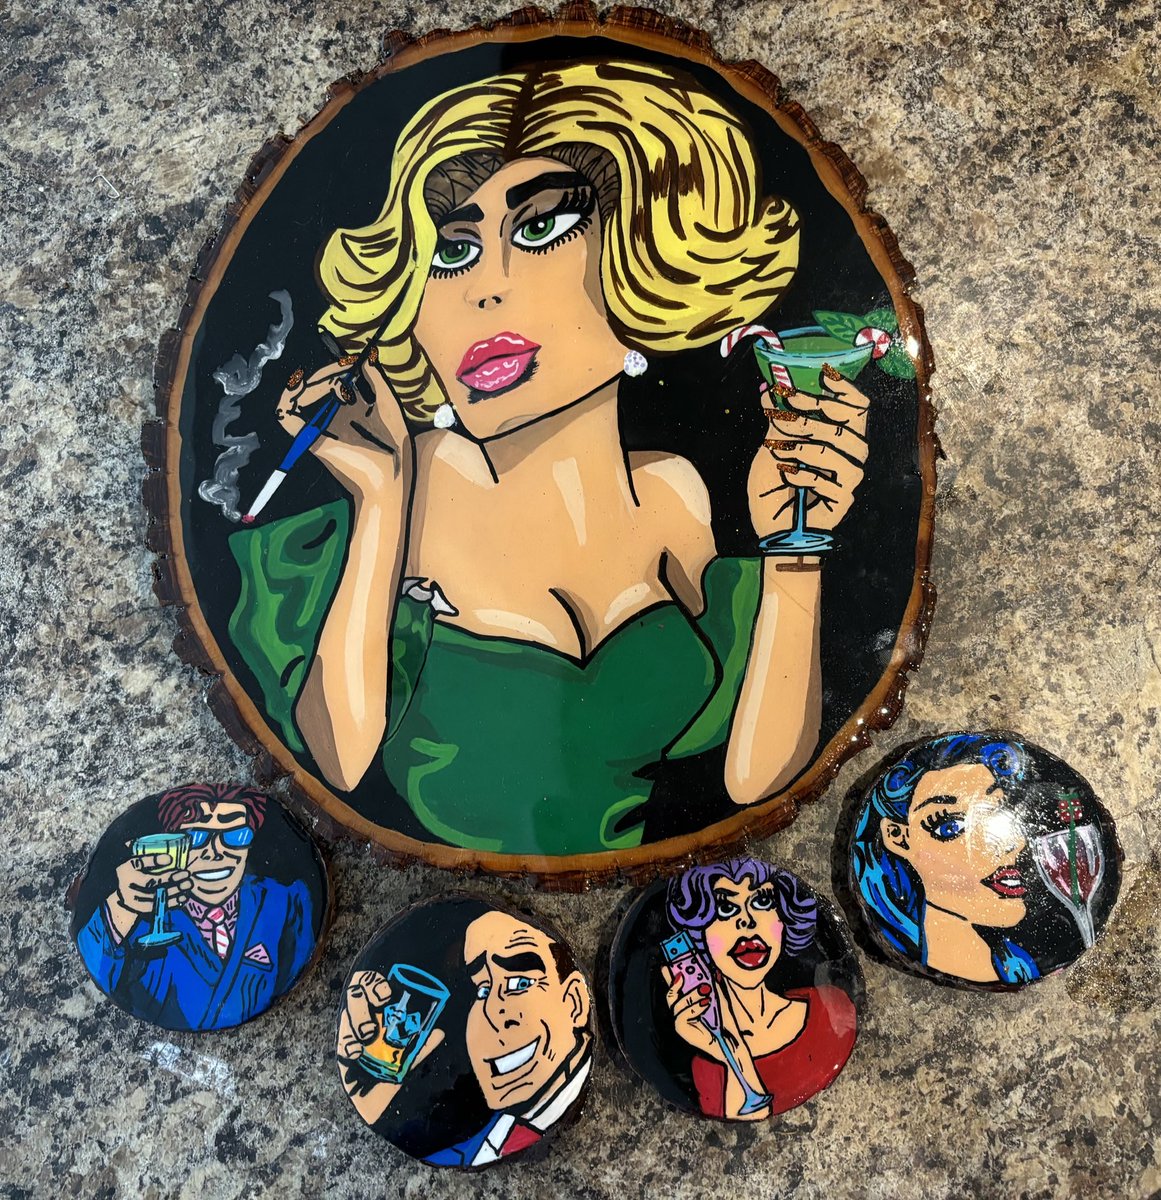 Handmade and painted epoxy resin art on Live Edgewood cookies.  Epoxy resin can withstand hot and cold temperatures for your beverages and entertainment purposes #handmade #art #artist #coasters #rusticdecor #epoxyresin #homedecor #popart #artisan #charcuterie #liveedge #painting